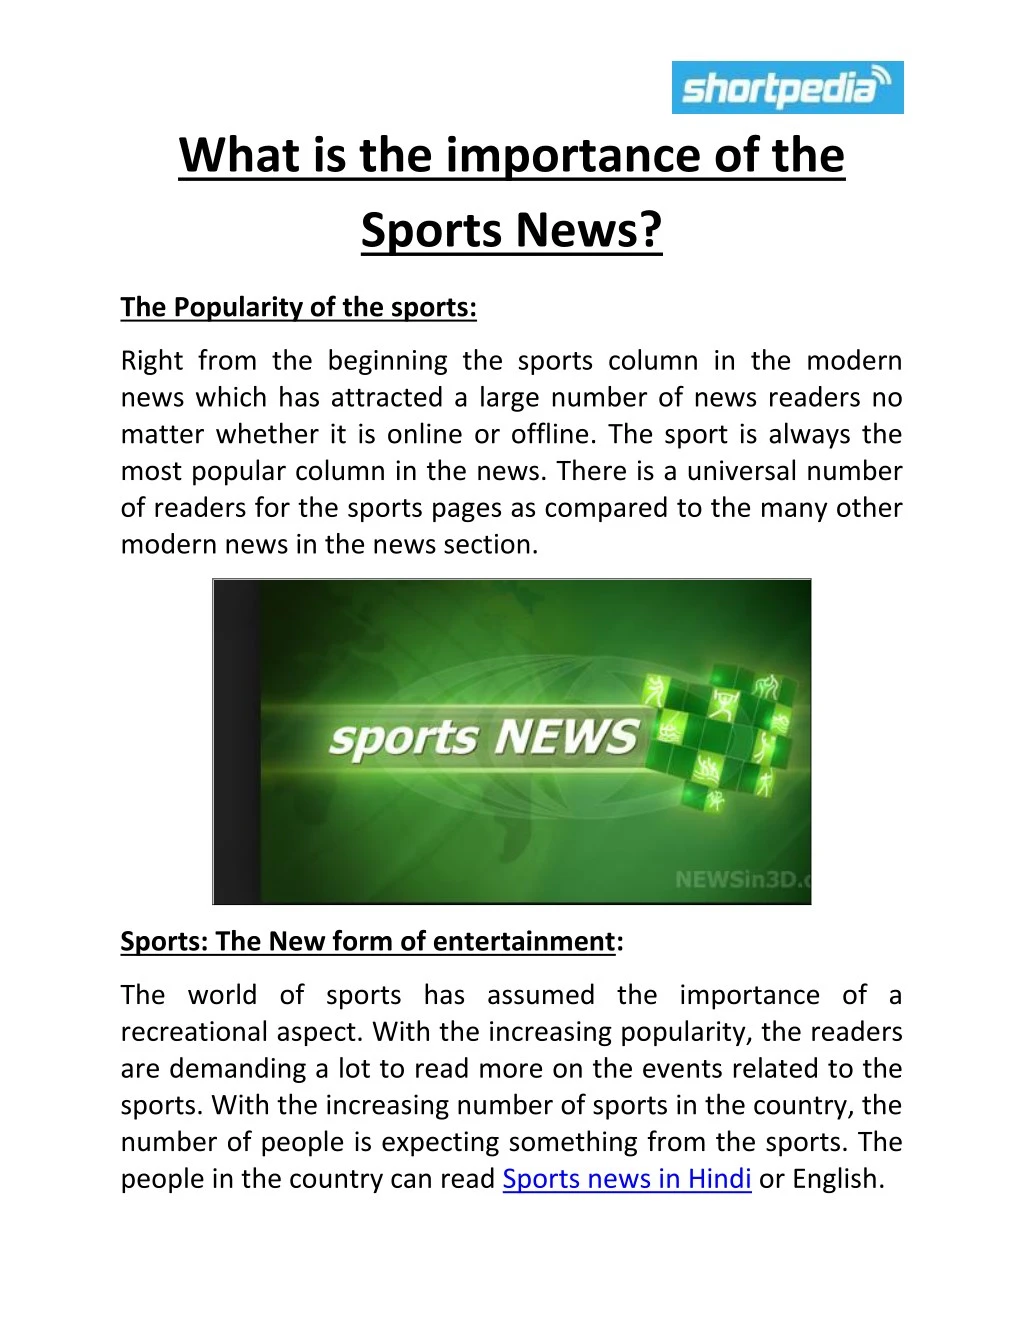 what is the importance of the sports news